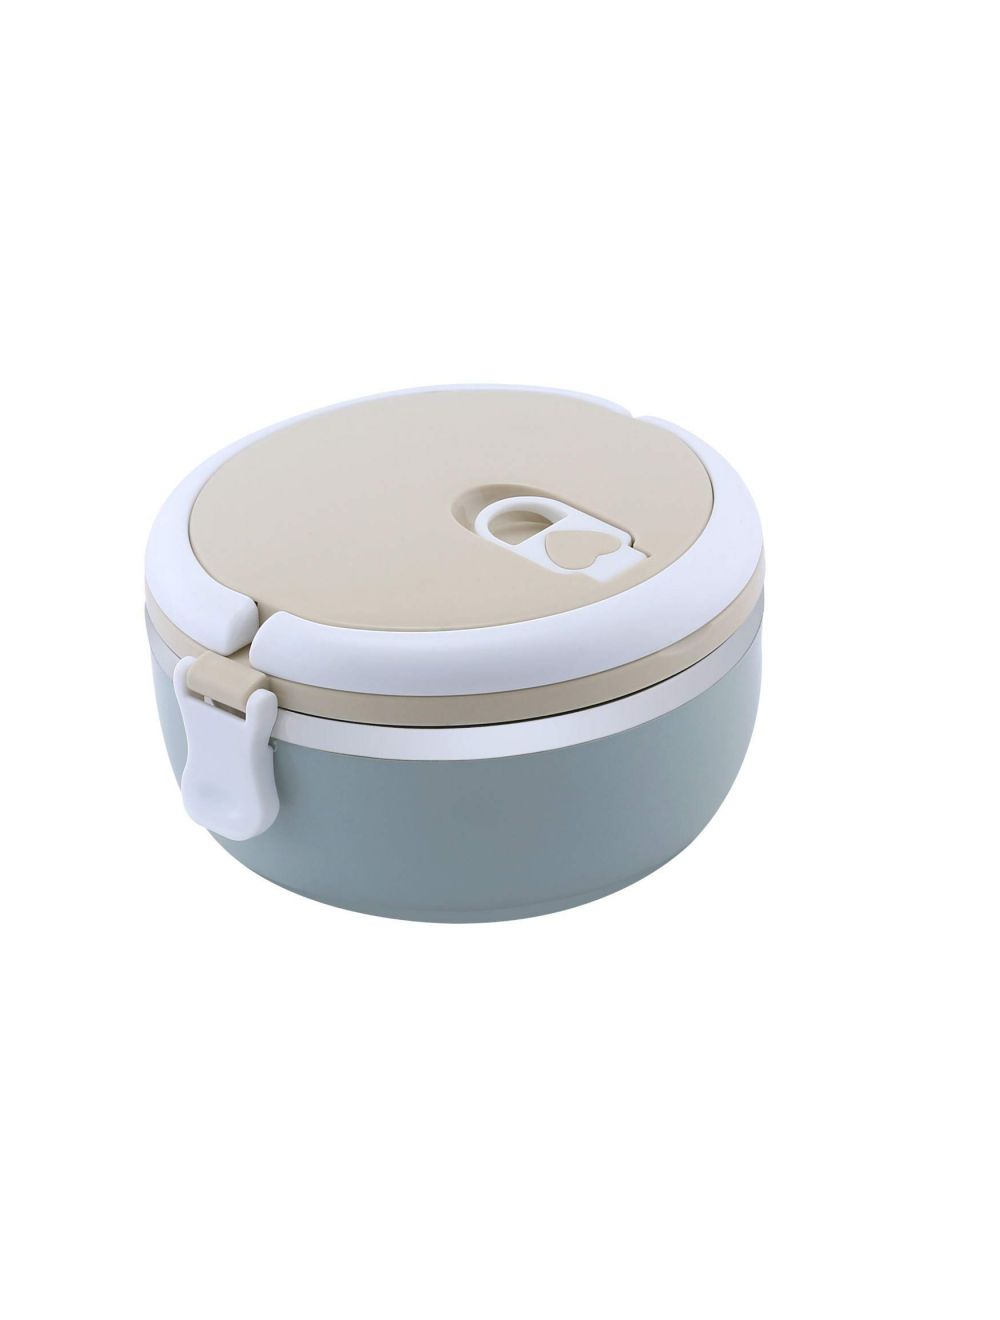 Royalford 700 ml Single Layer Round Lunch Box